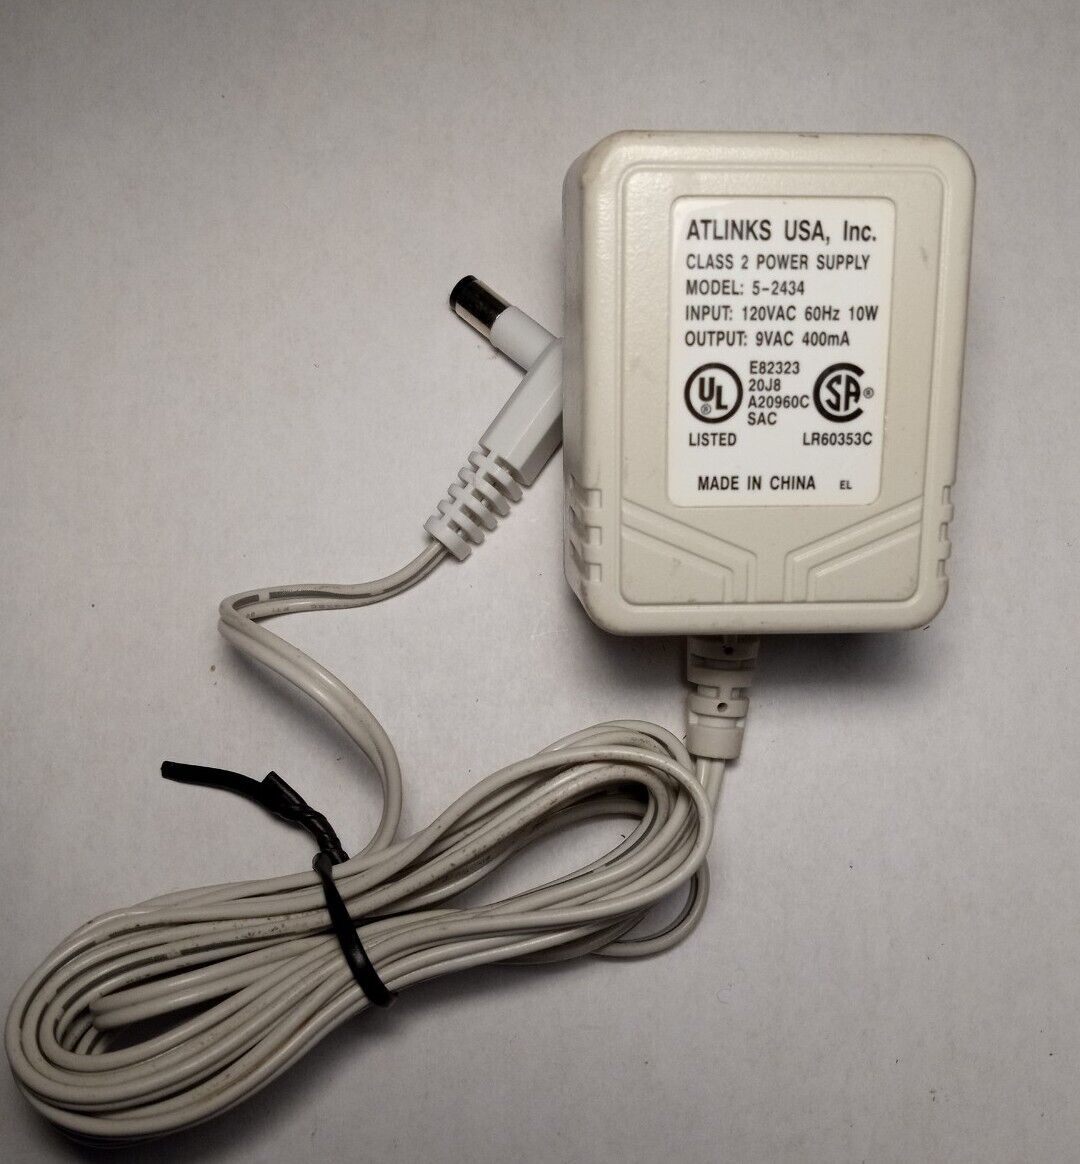 *Brand NEW* 9VAC 400mA AC Adapter Charger Tested Atlinks USA 5-2434 Class 2 Power Supply